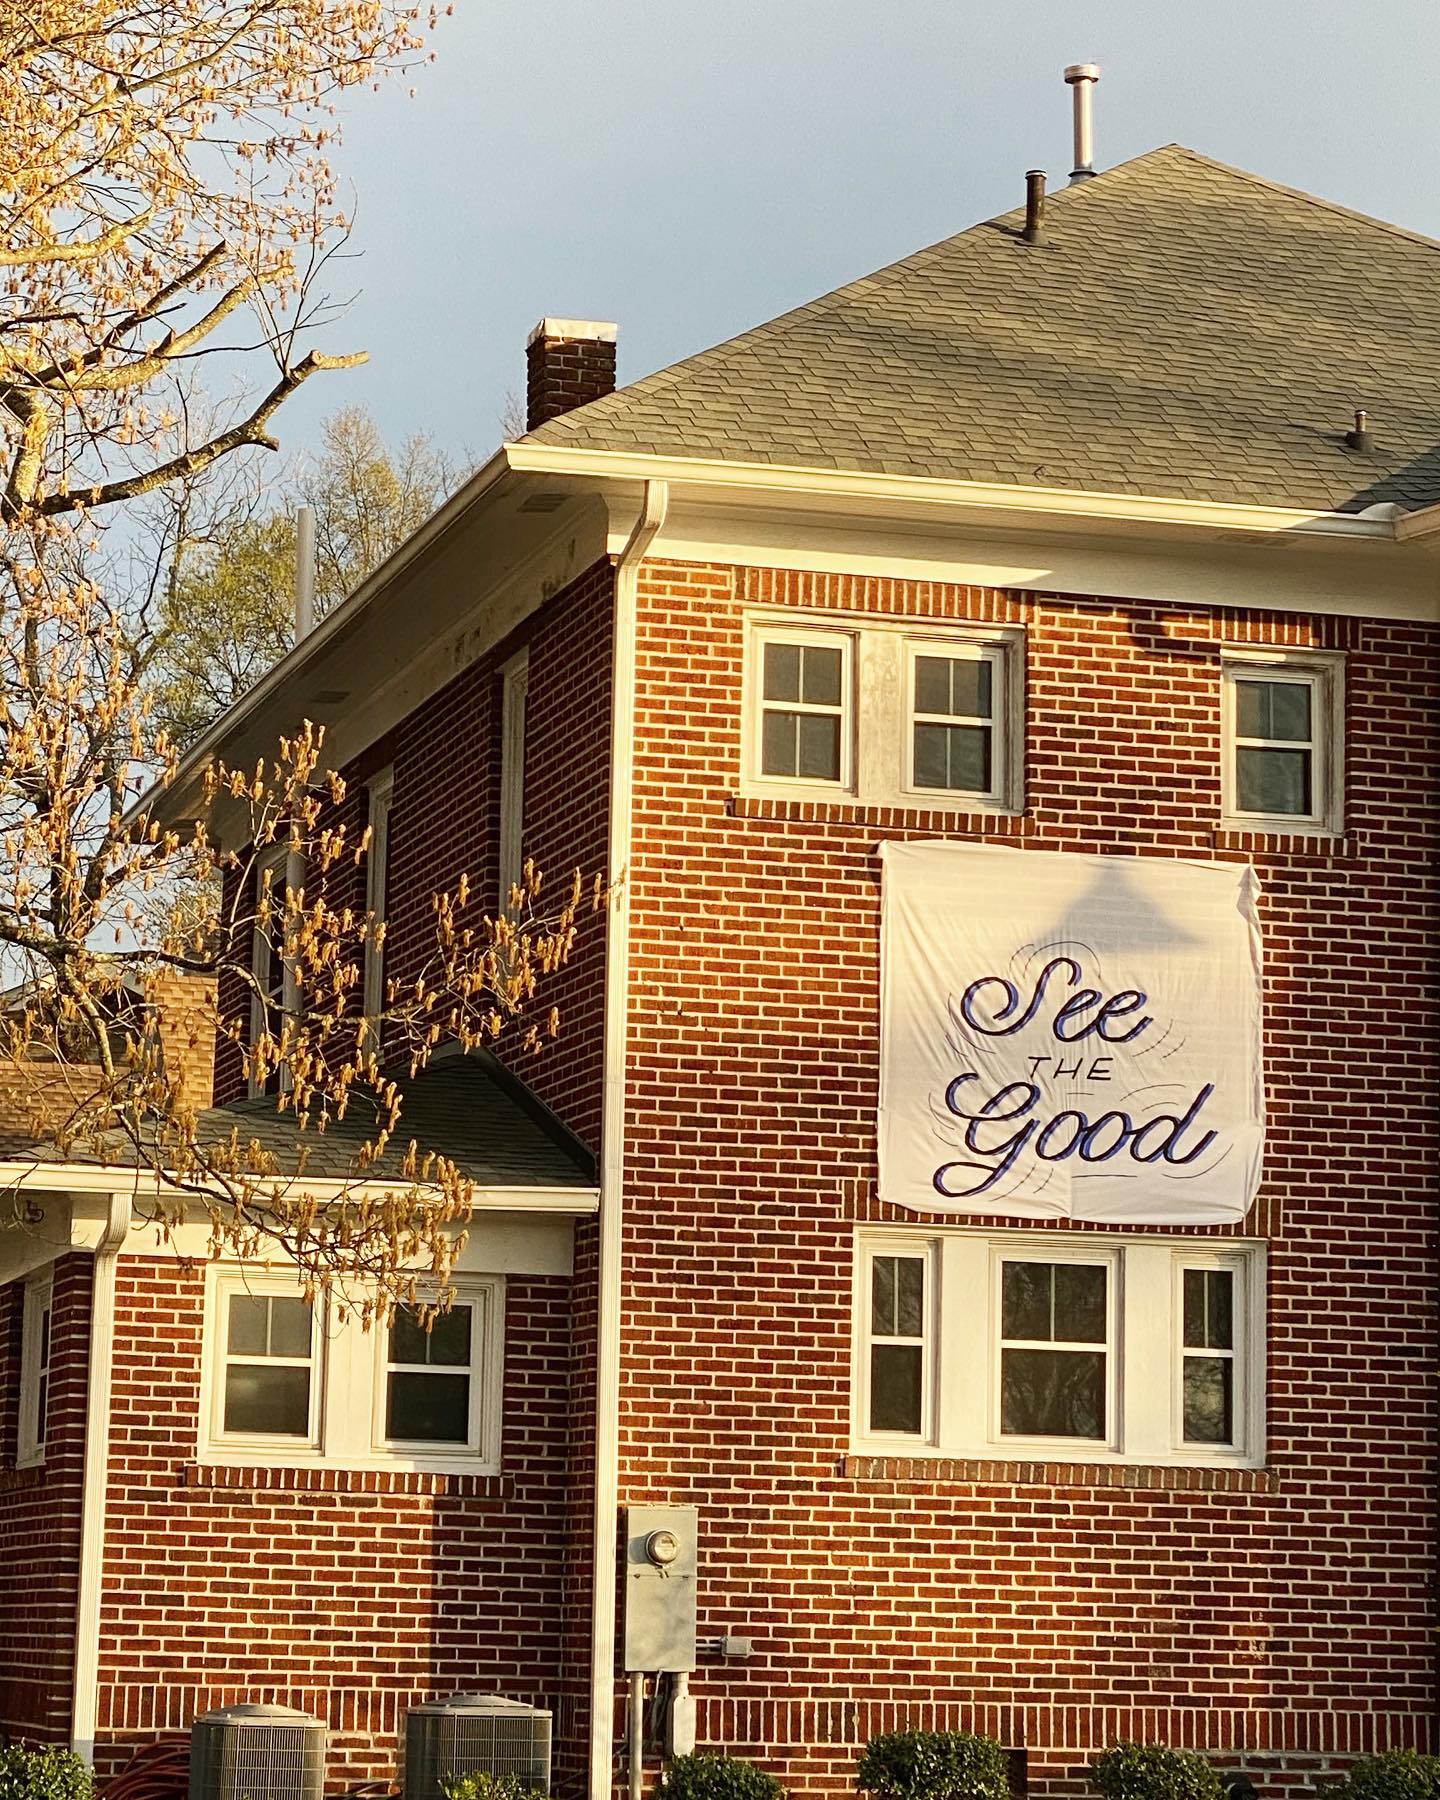 The Barbour Spangle Design building has a sheet on it that says "See The Good."